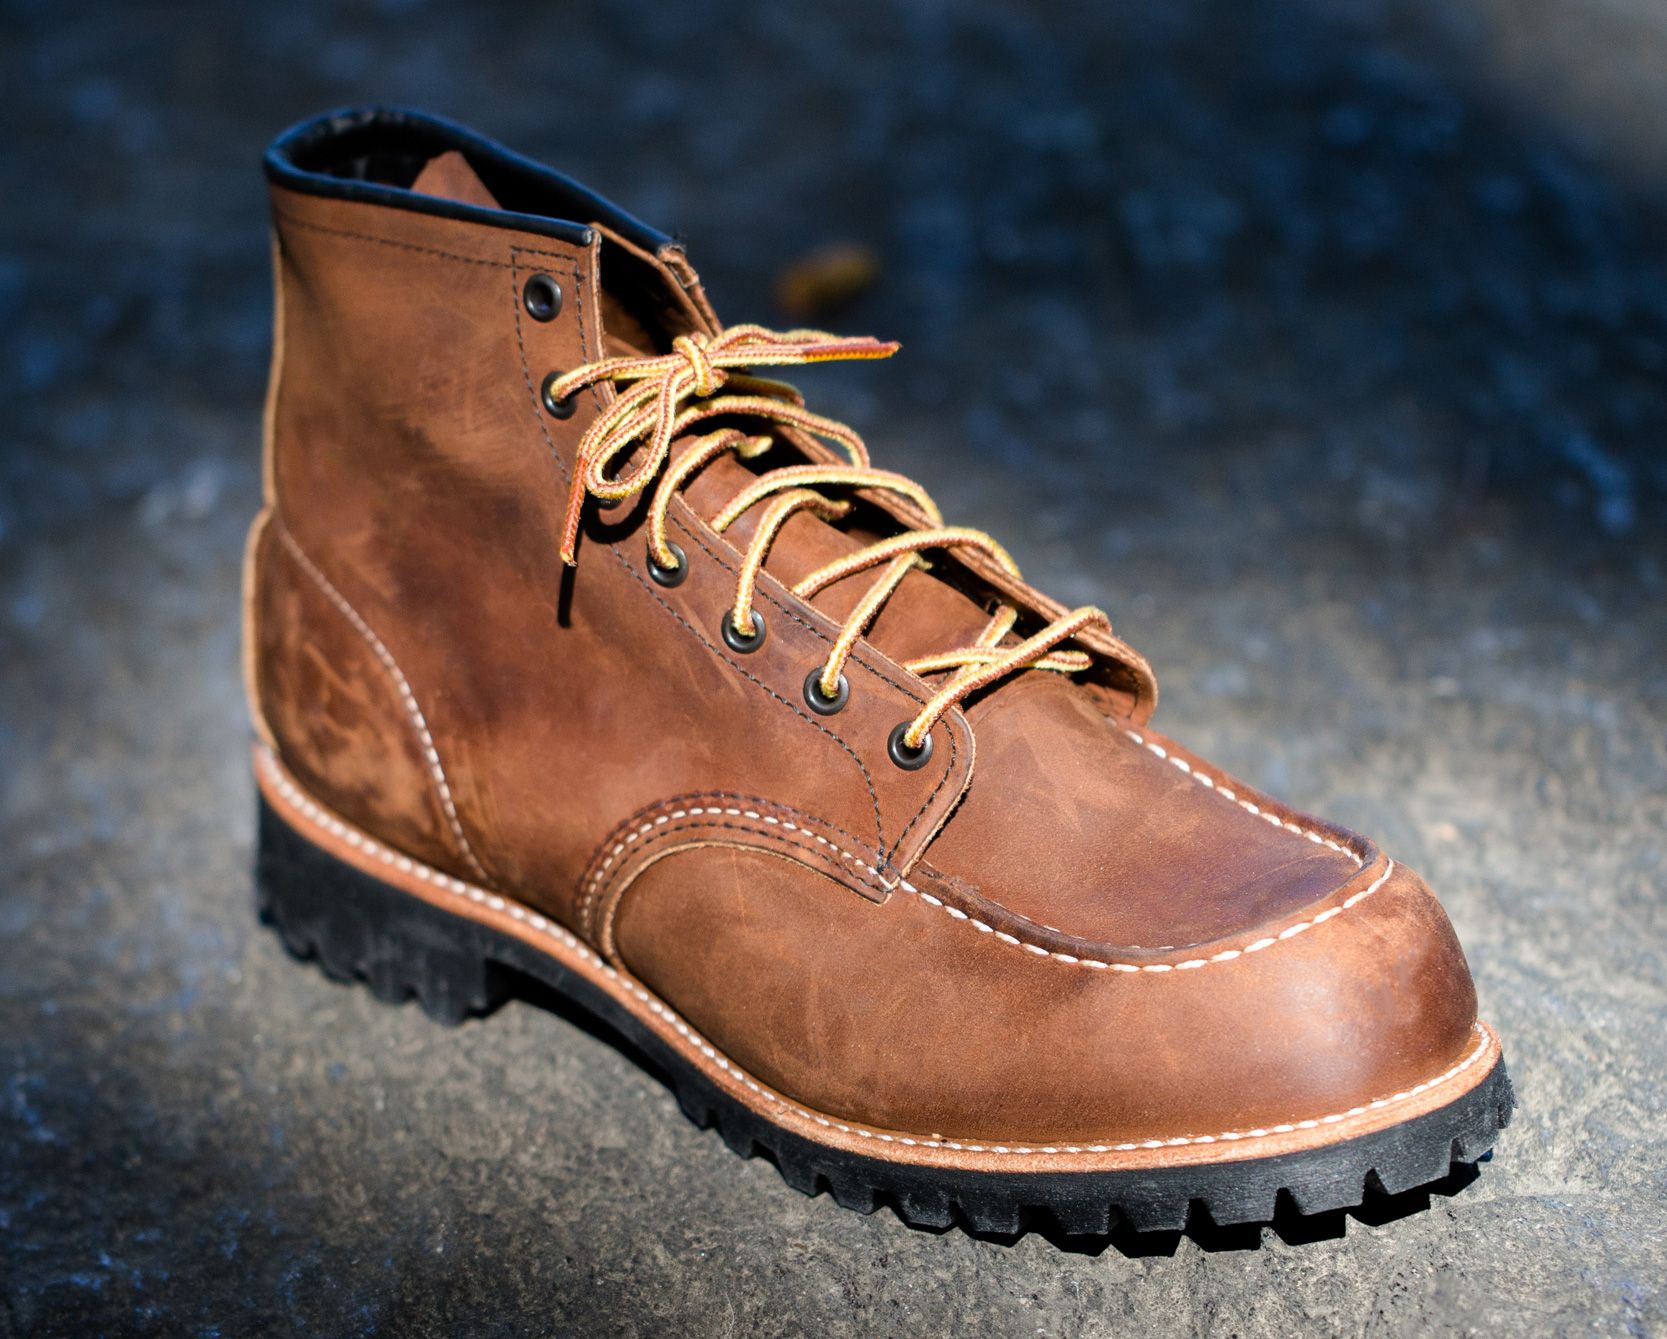 J.Crew Red Wing Launch Collaboration - This Red Wing J.Crew Boot